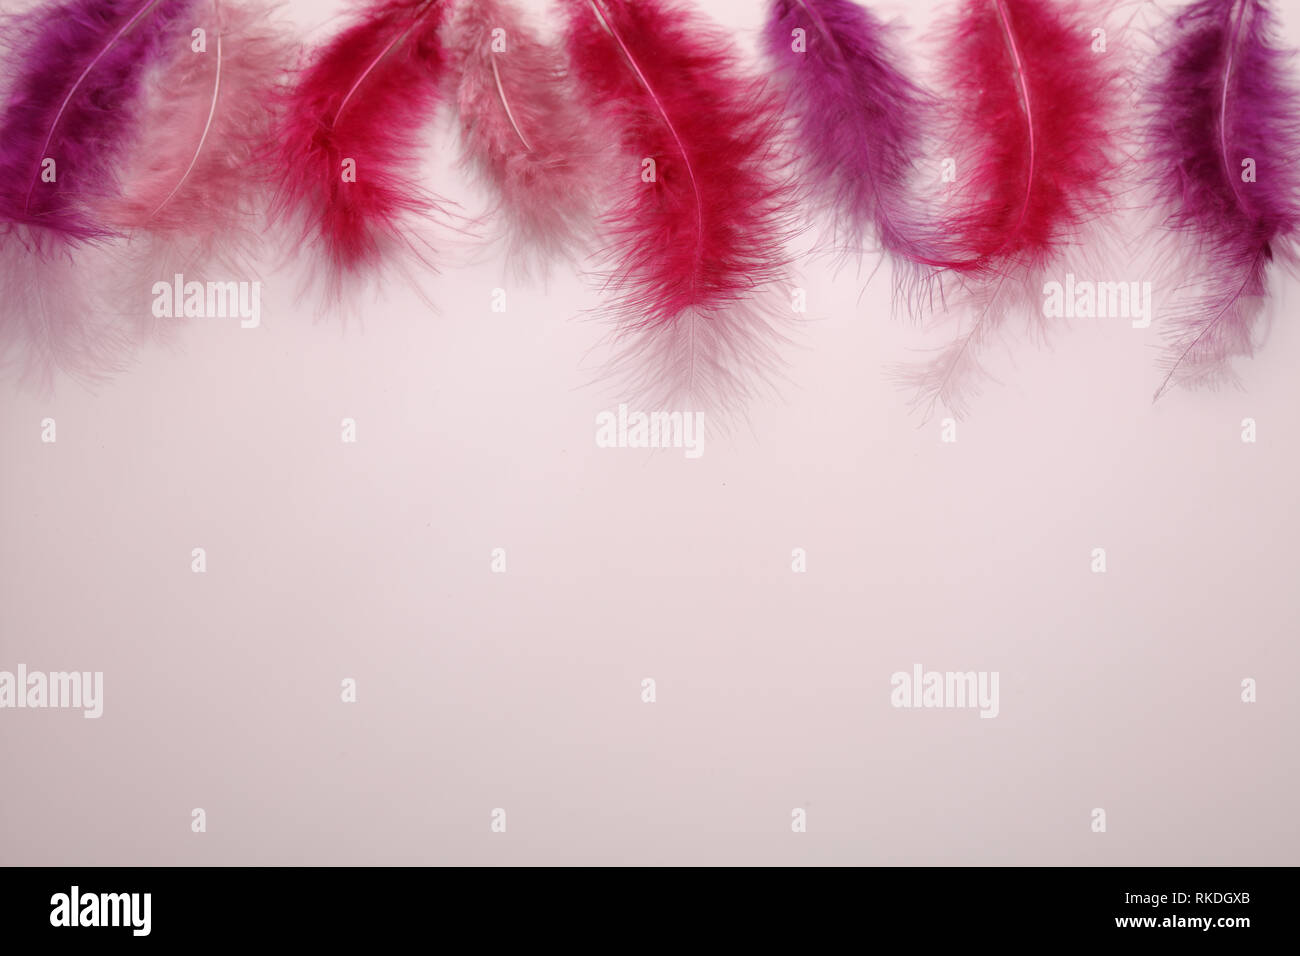 Red colored feathers on top border of pink background for Fastelavn celebration Stock Photo